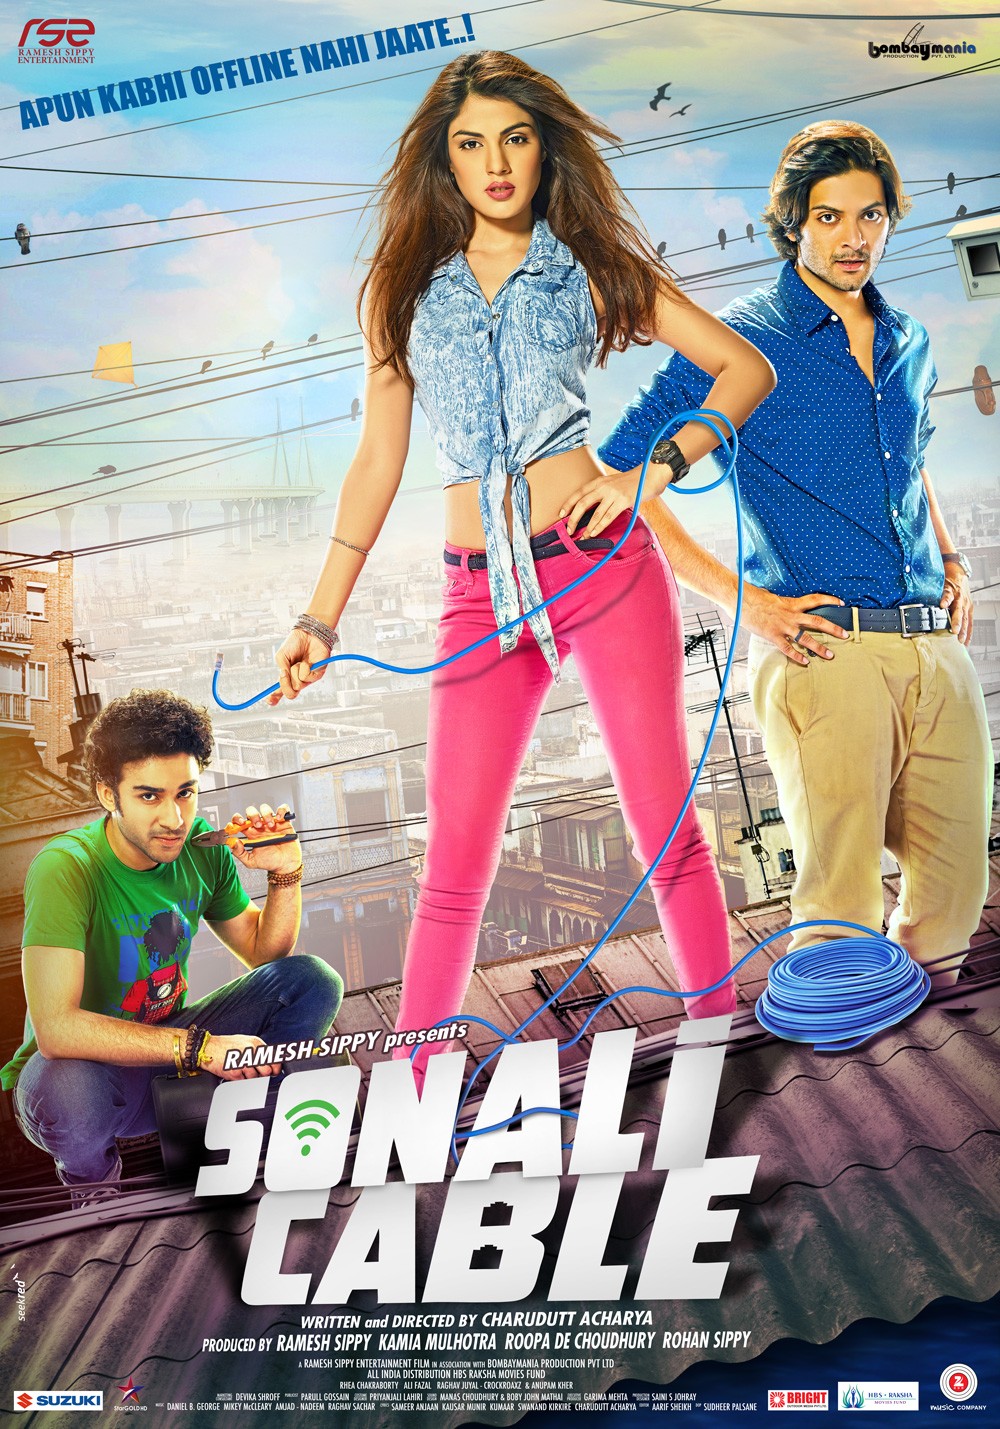 Extra Large Movie Poster Image for Sonali Cable (#2 of 5)